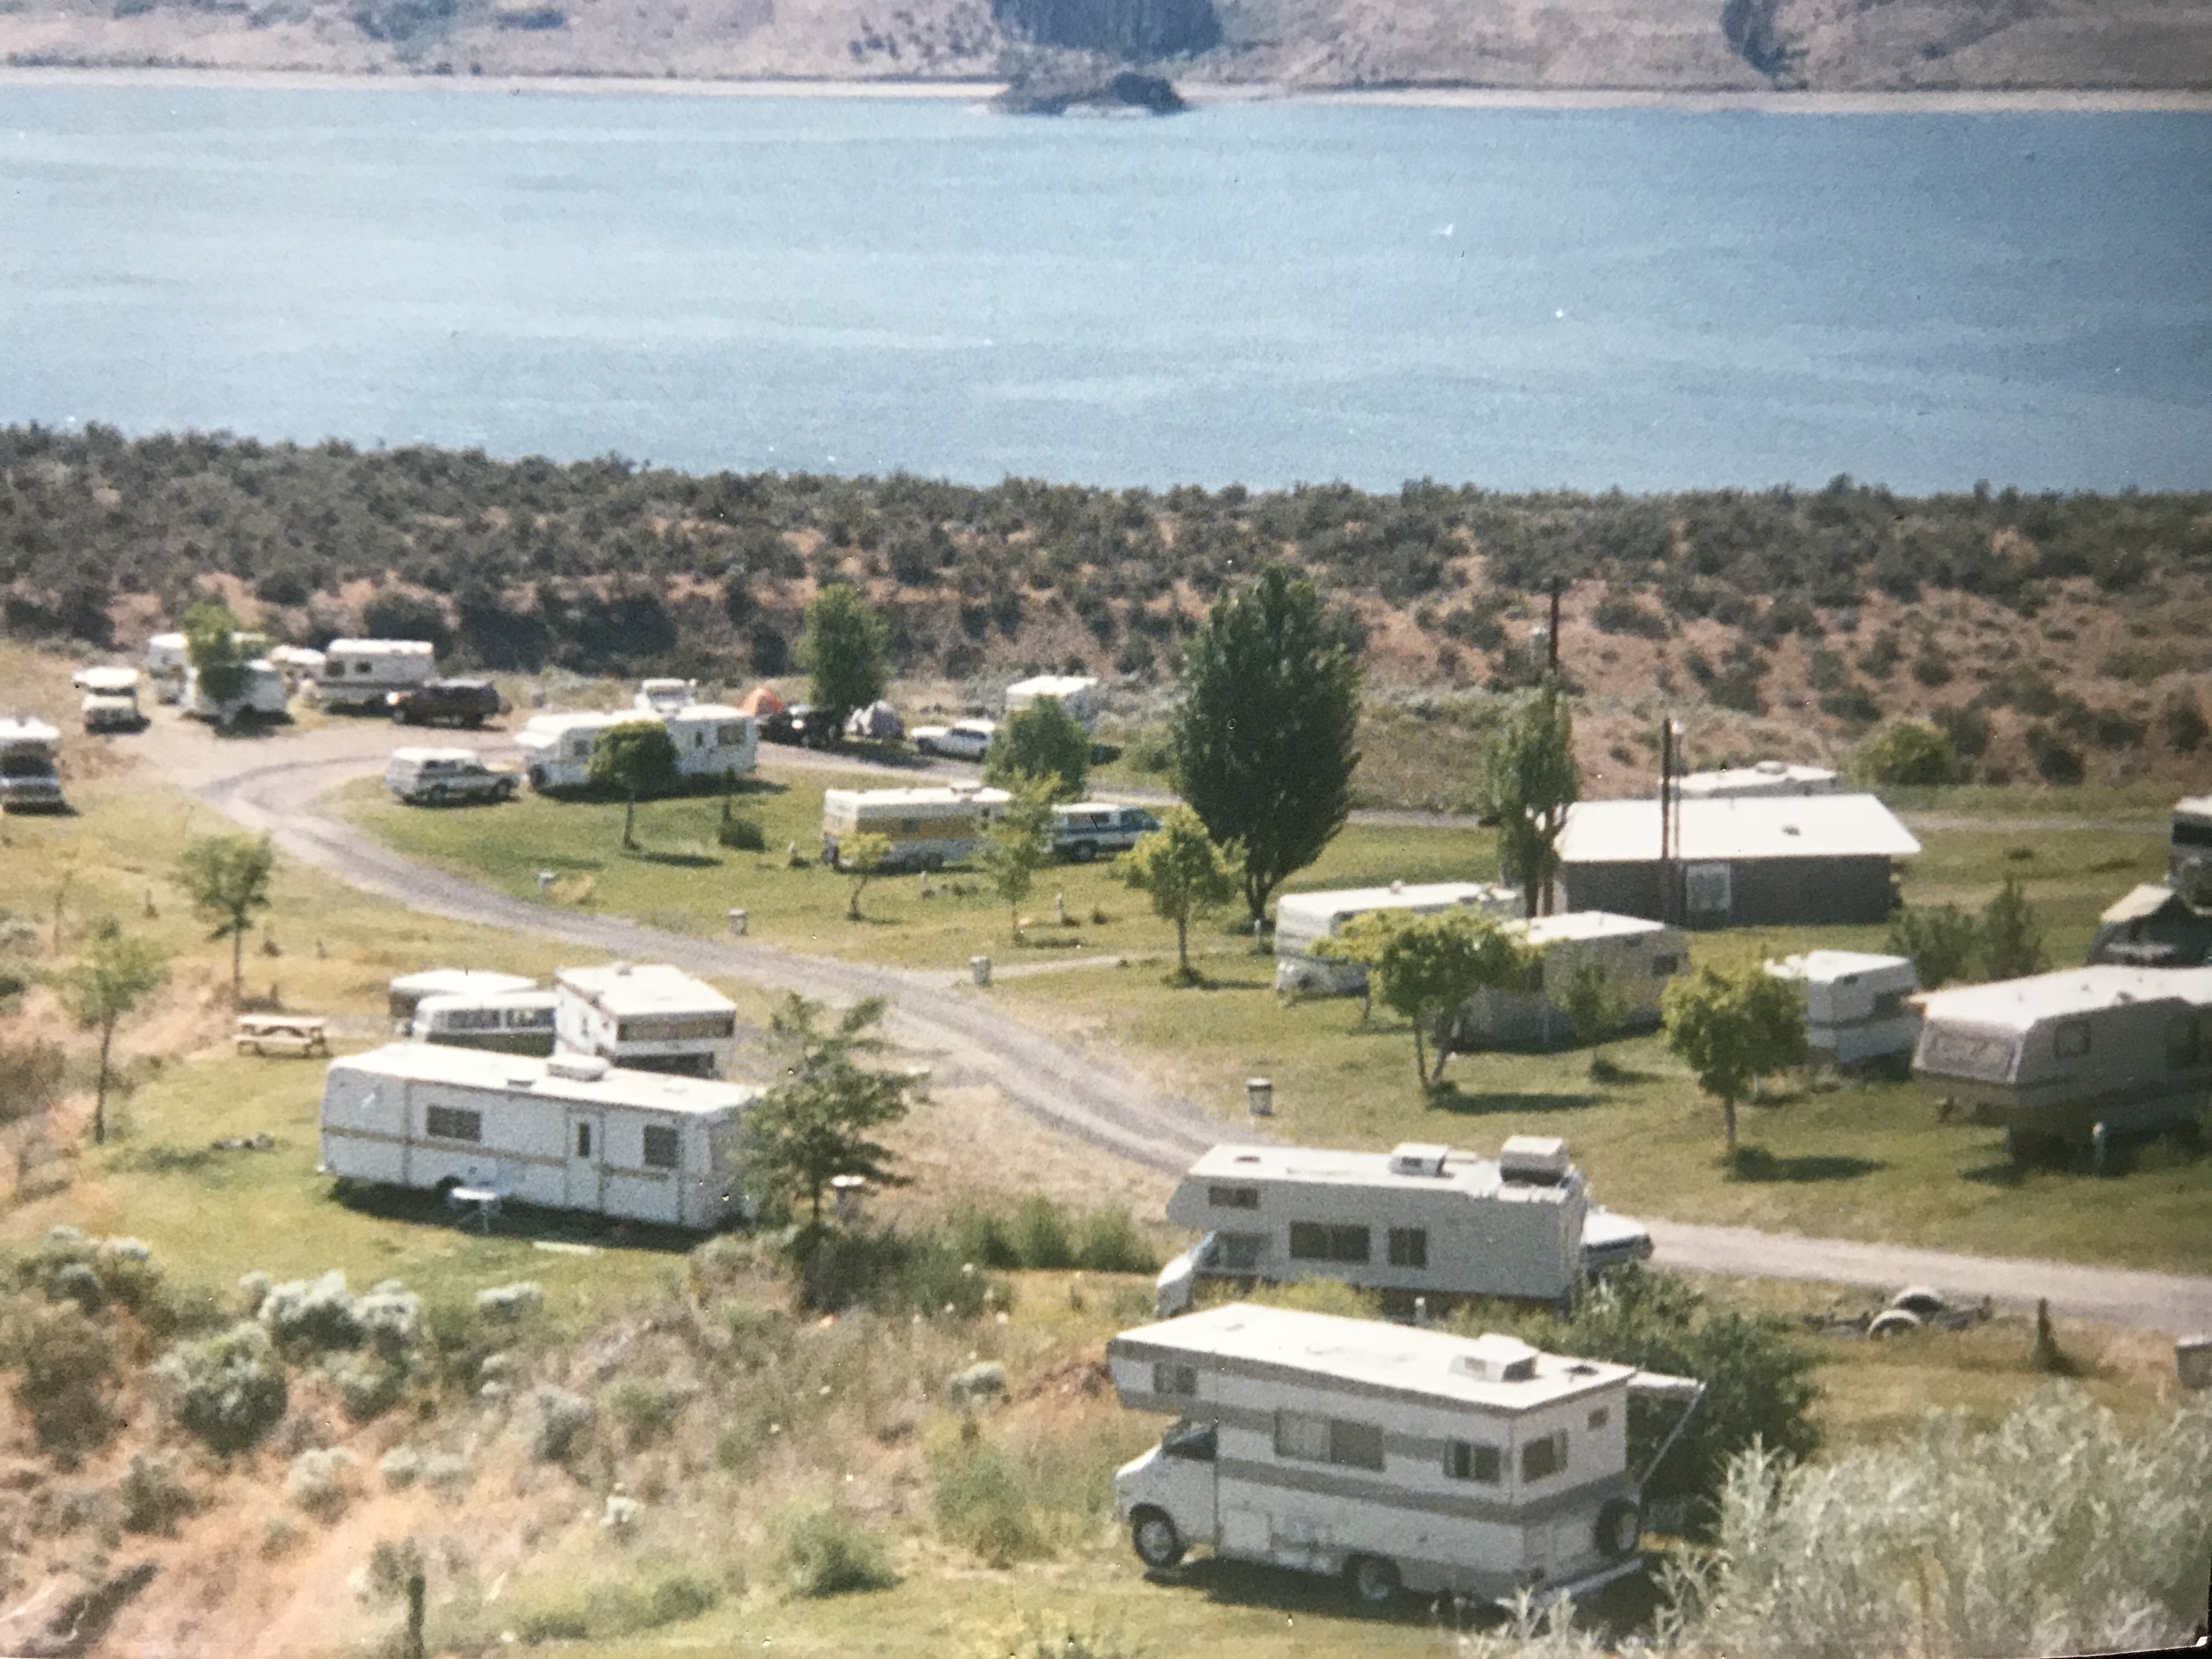 Early Seven Bays Bays Campground